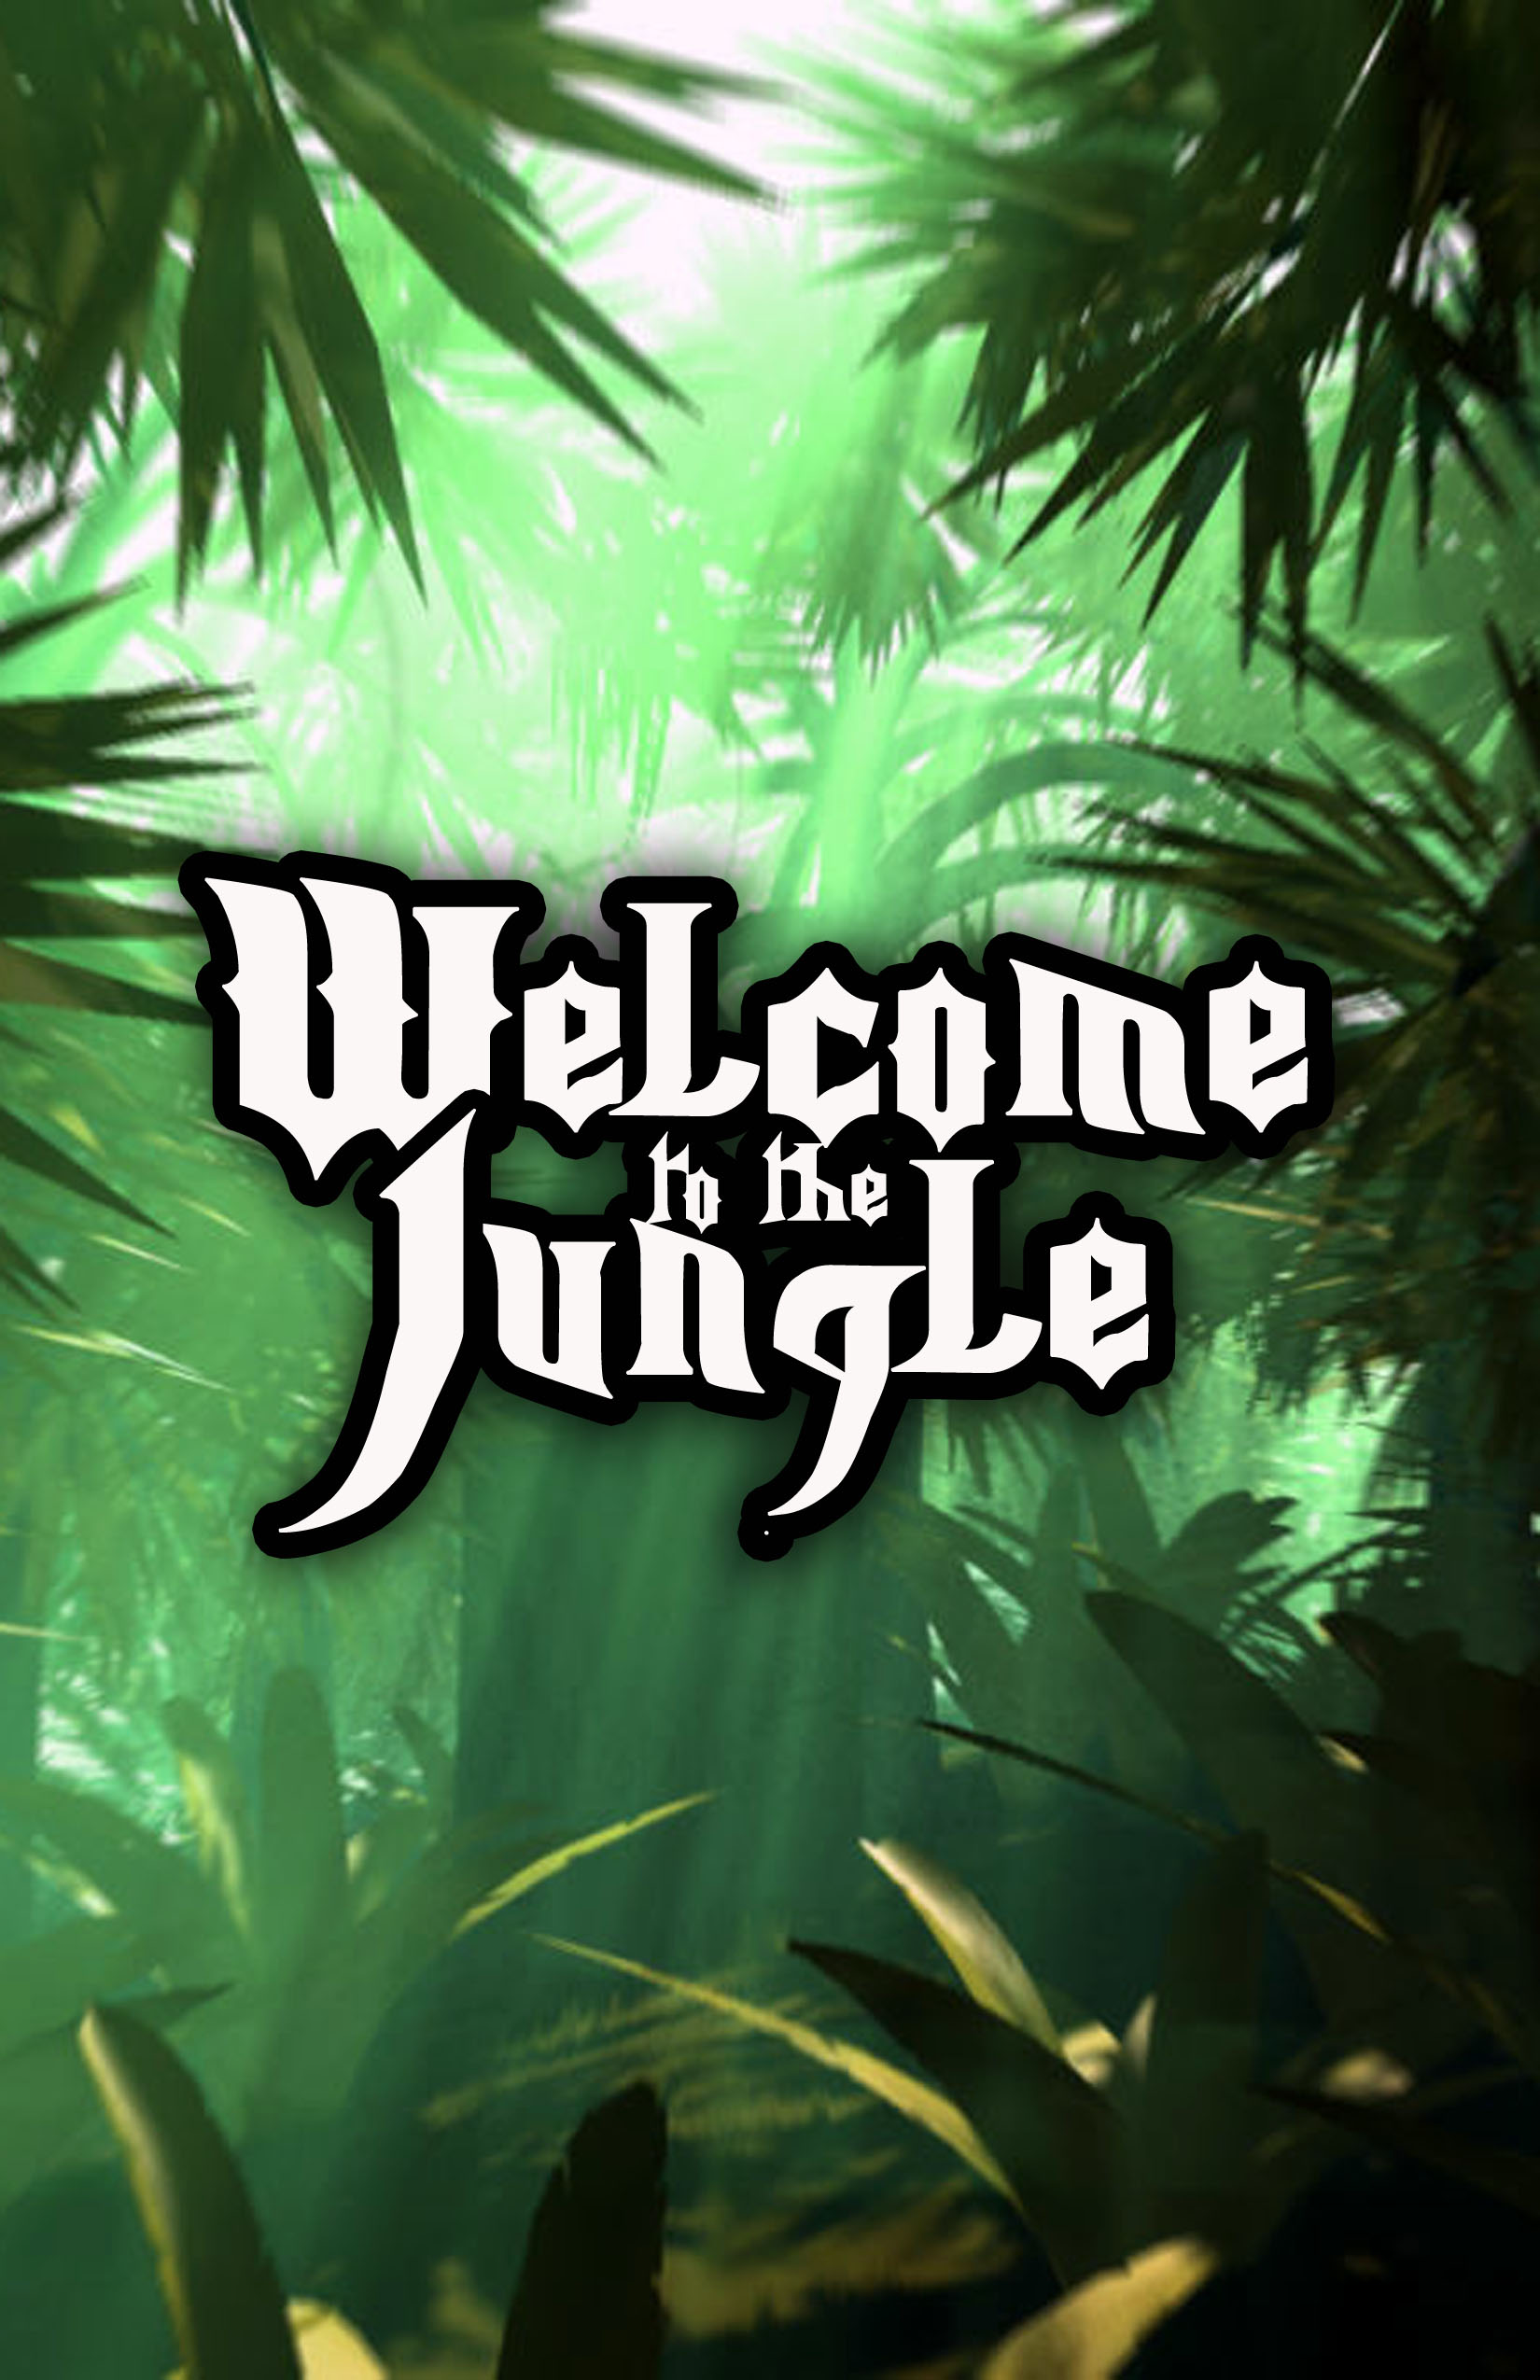 In the jungle текст. Надпись джунгли. Welcome to the Jungle. Our Jungle. Welcome to the Jungle арт.